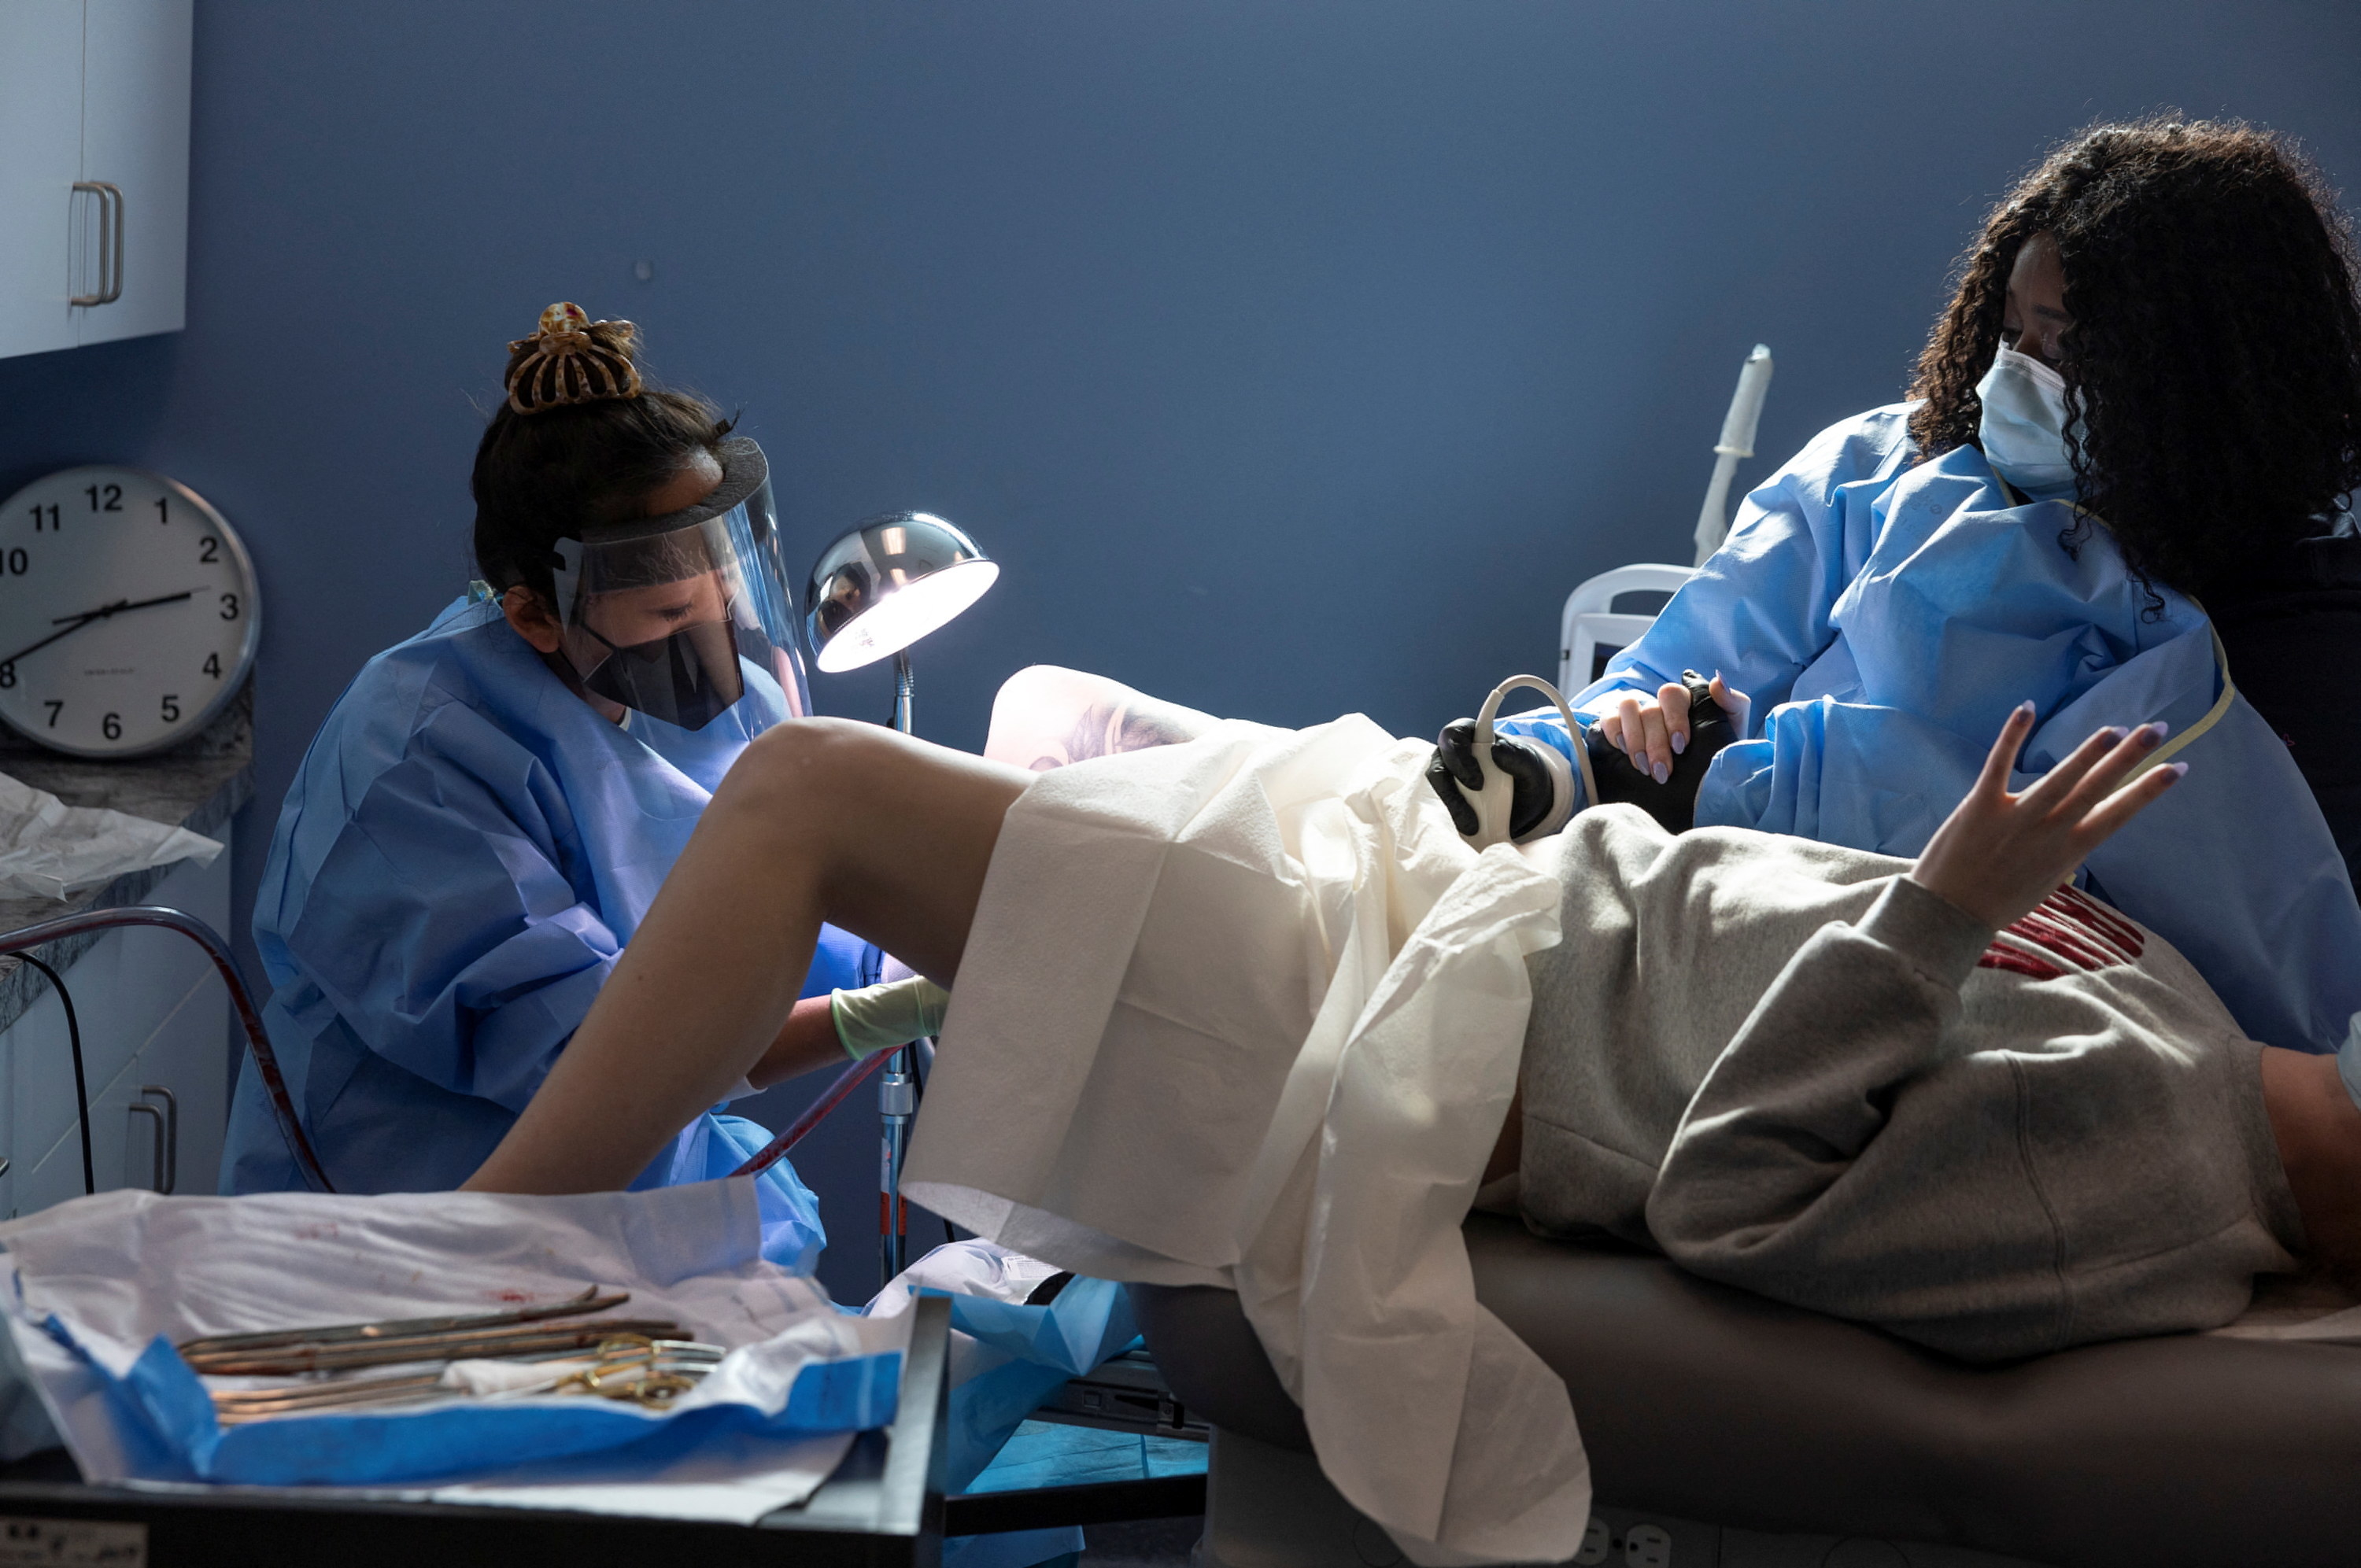 Two people in surgical gowns and masks work on a patient